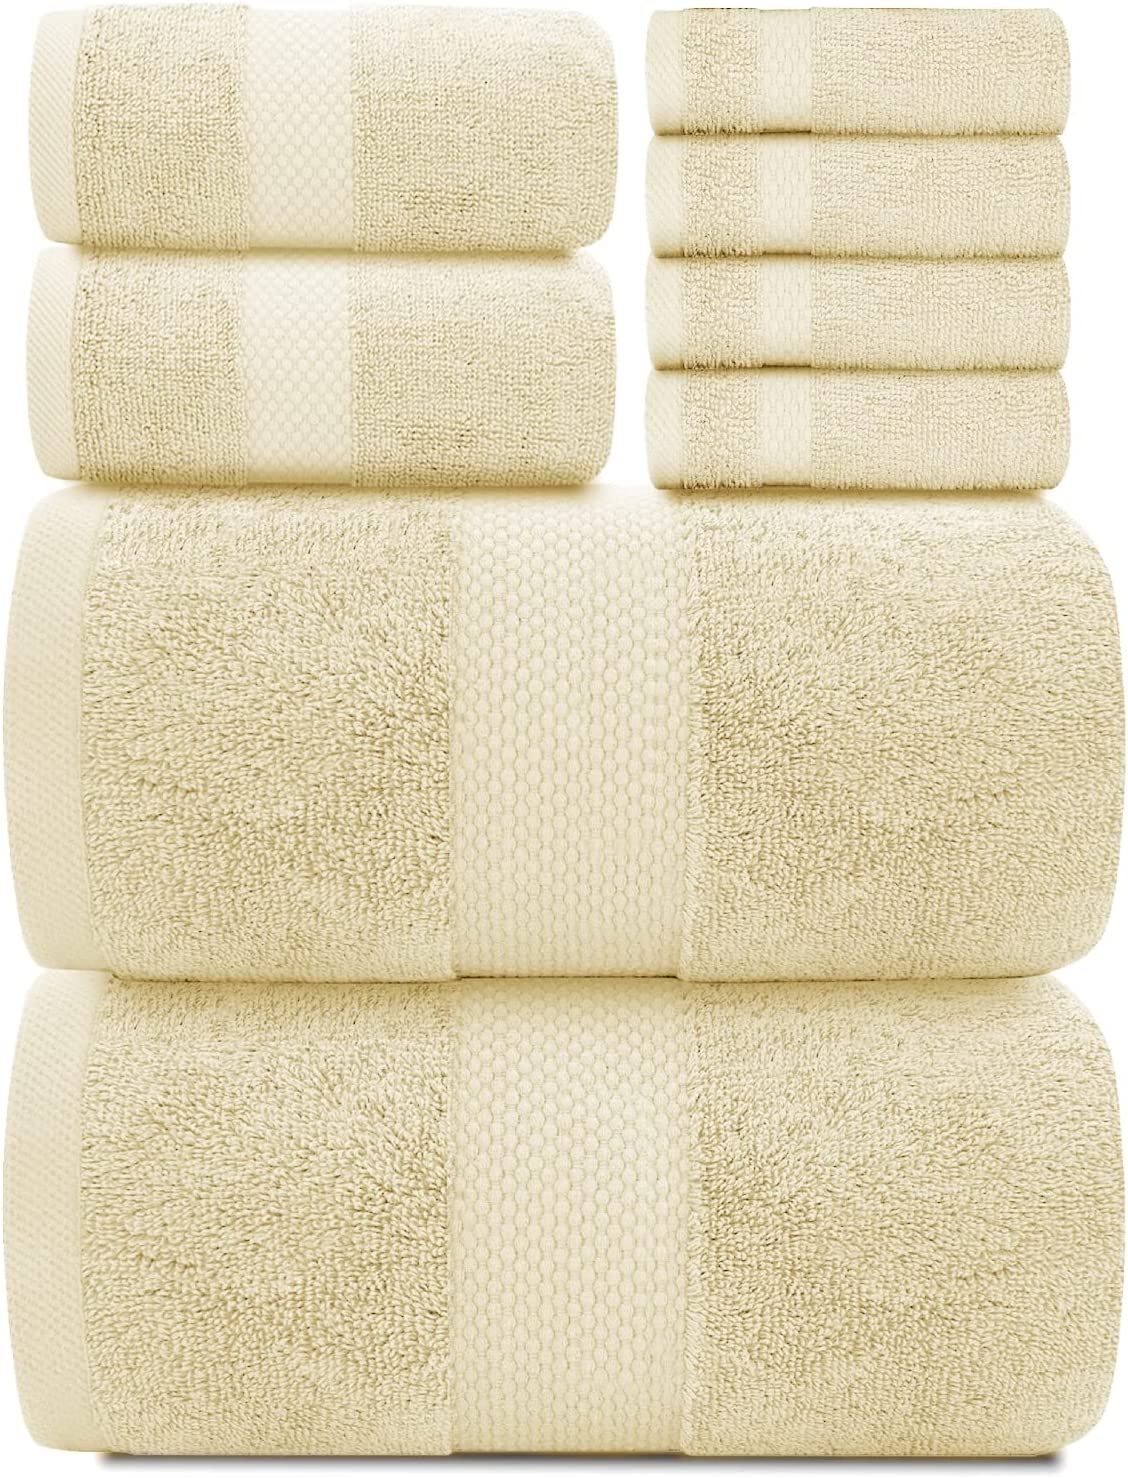 Hotel Collection 8Pc set Beige towels